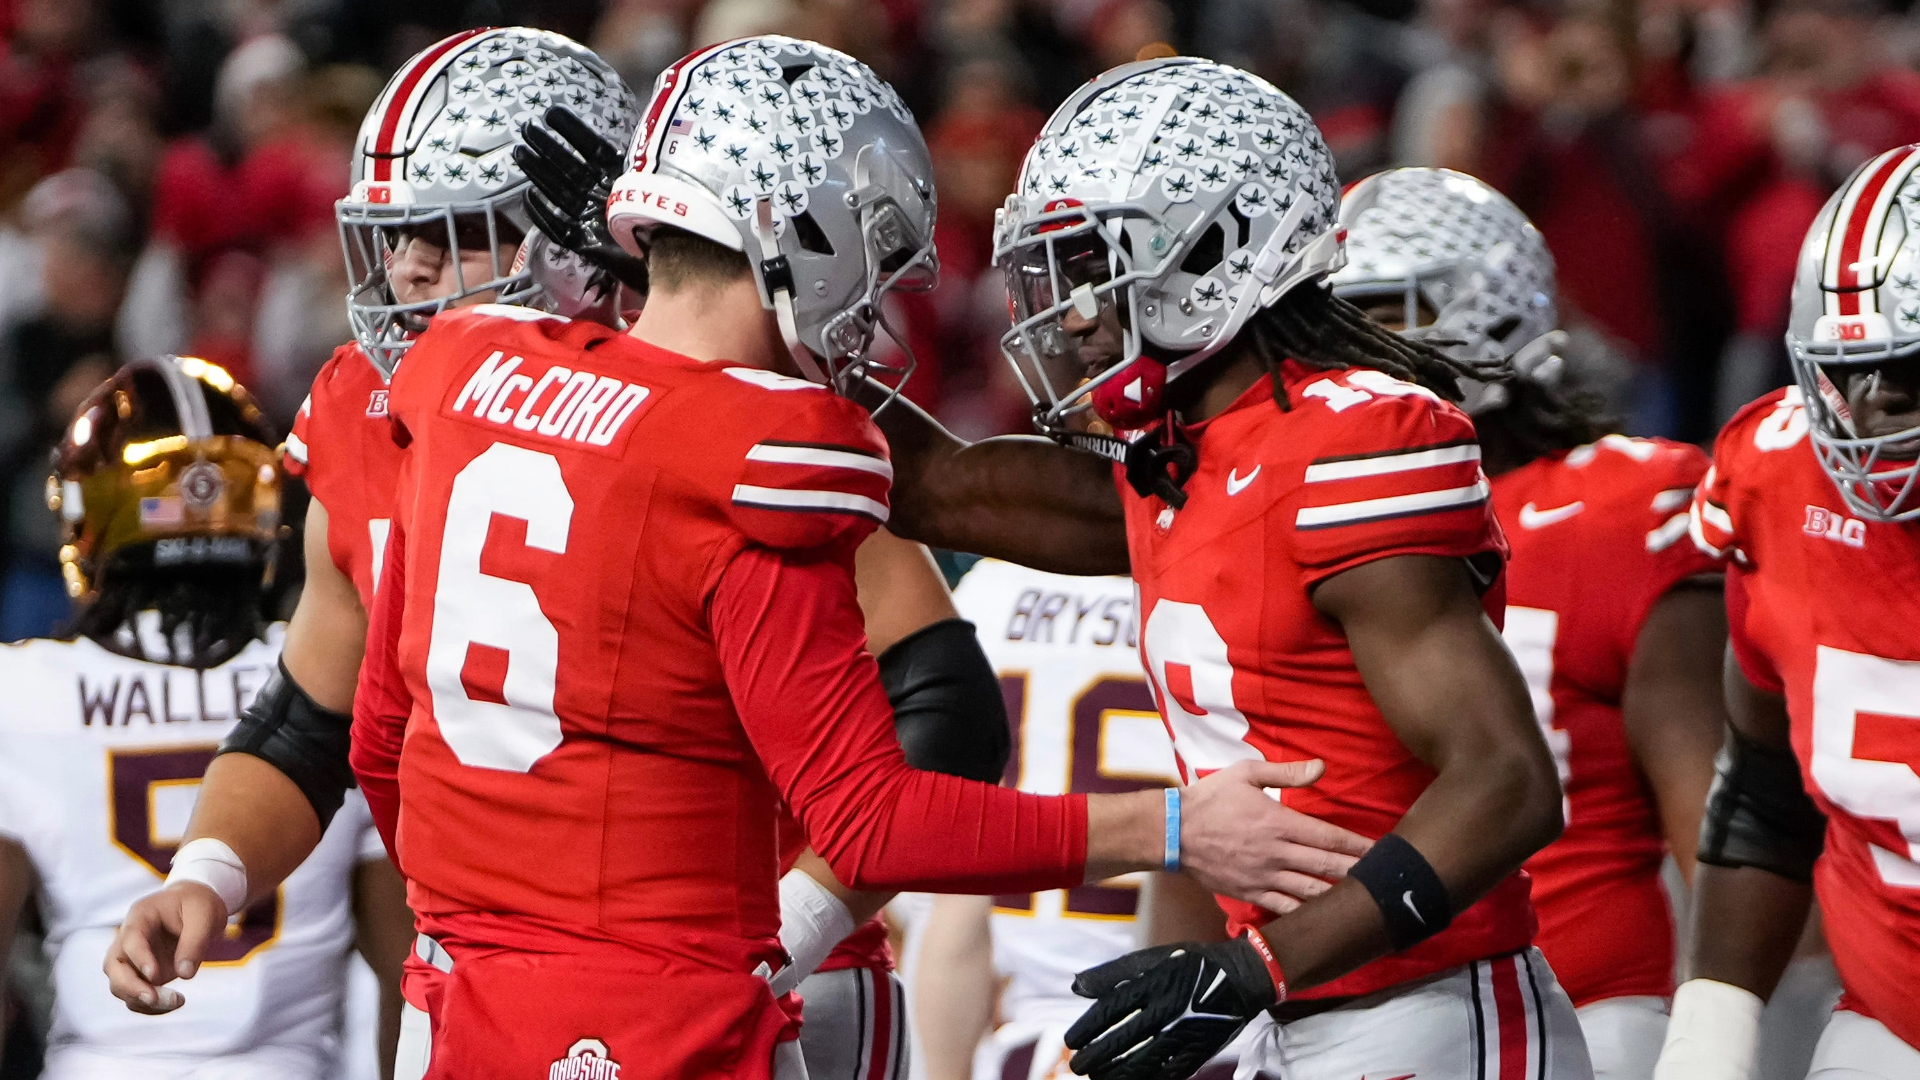 Ohio State Vs. Michigan Live Stream: Watch ‘The Game’ On TV,
Online